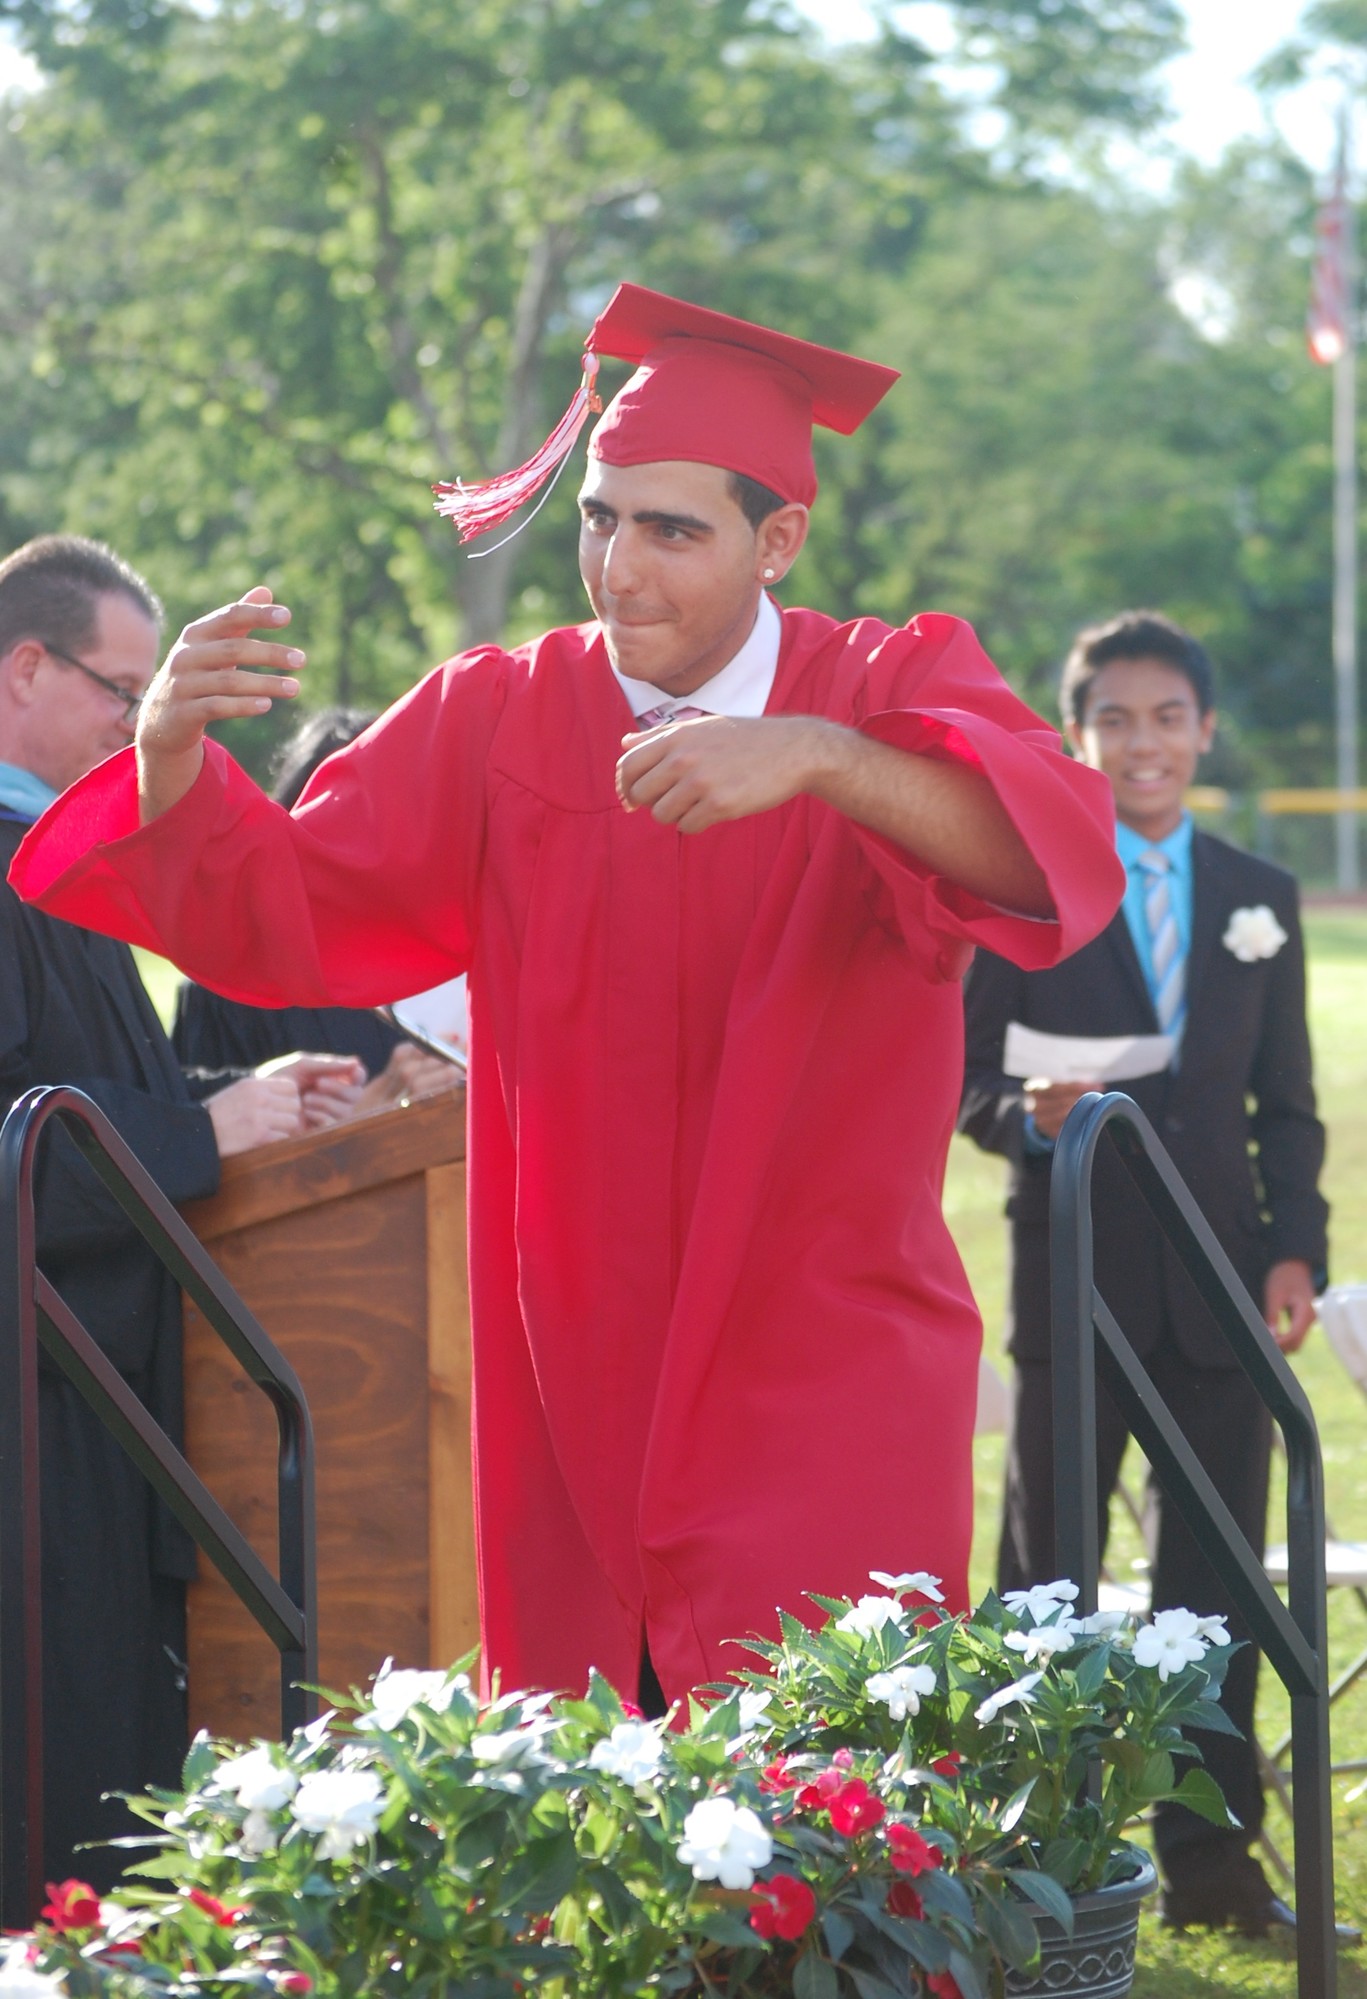 Anthony Arnone went up with some flair to receive his diploma on June 26.